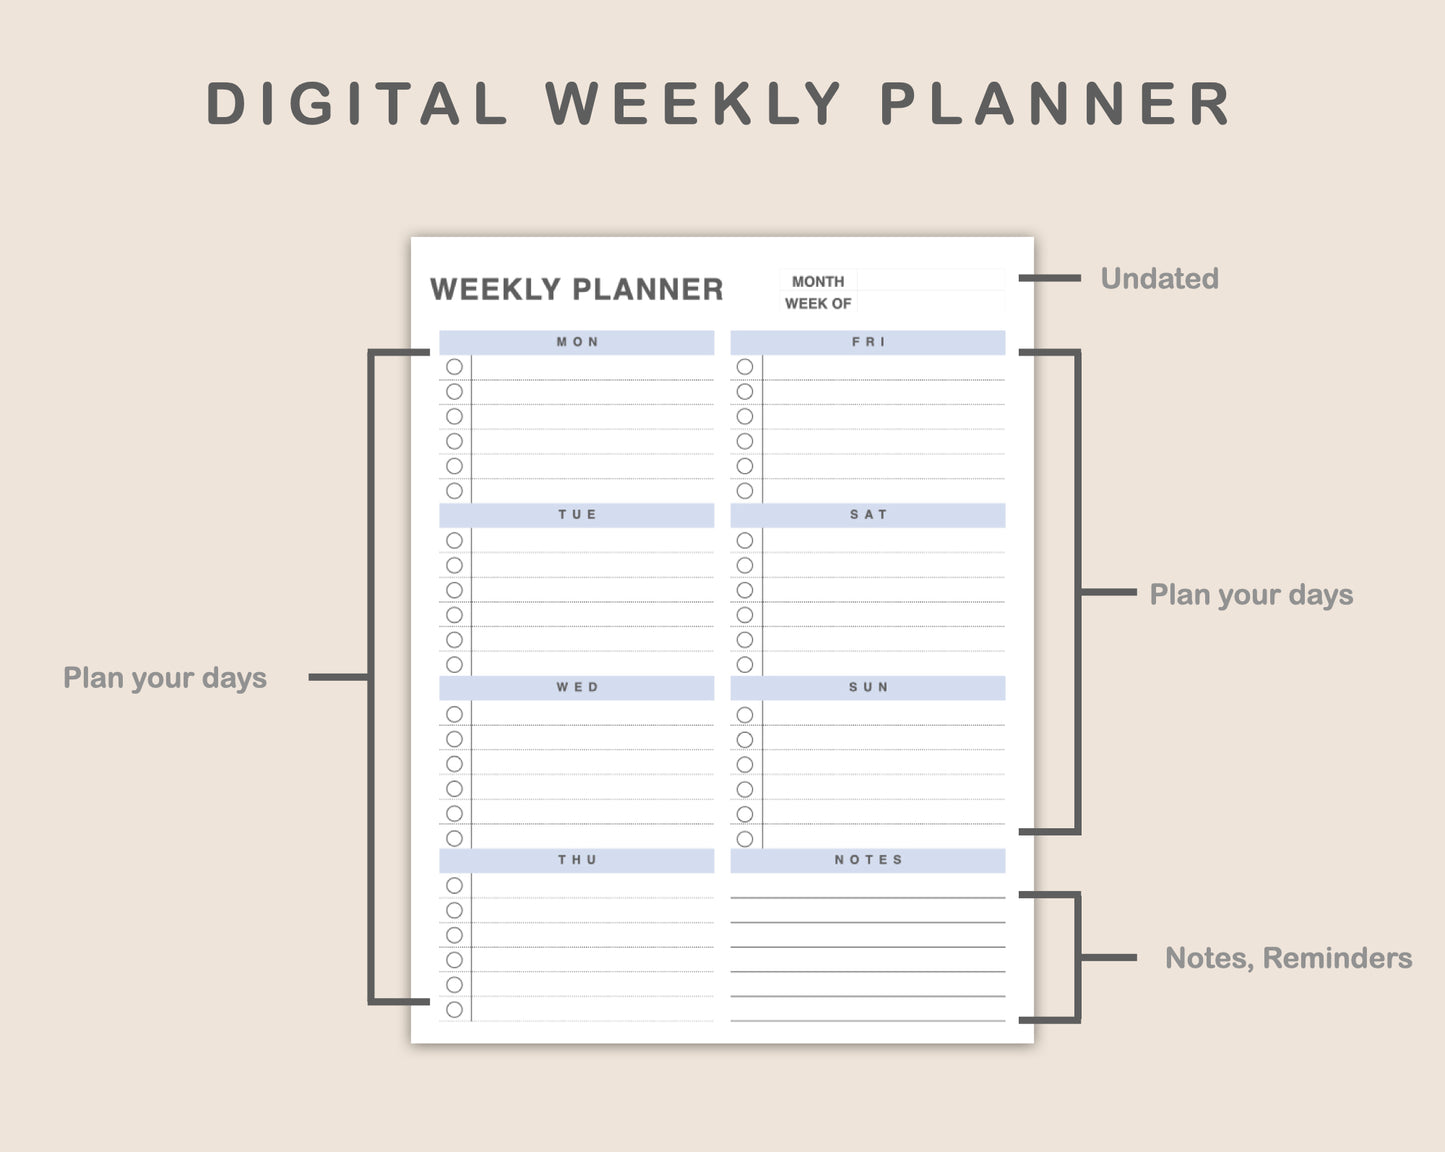 Weekly Planner, To Do List - Portrait